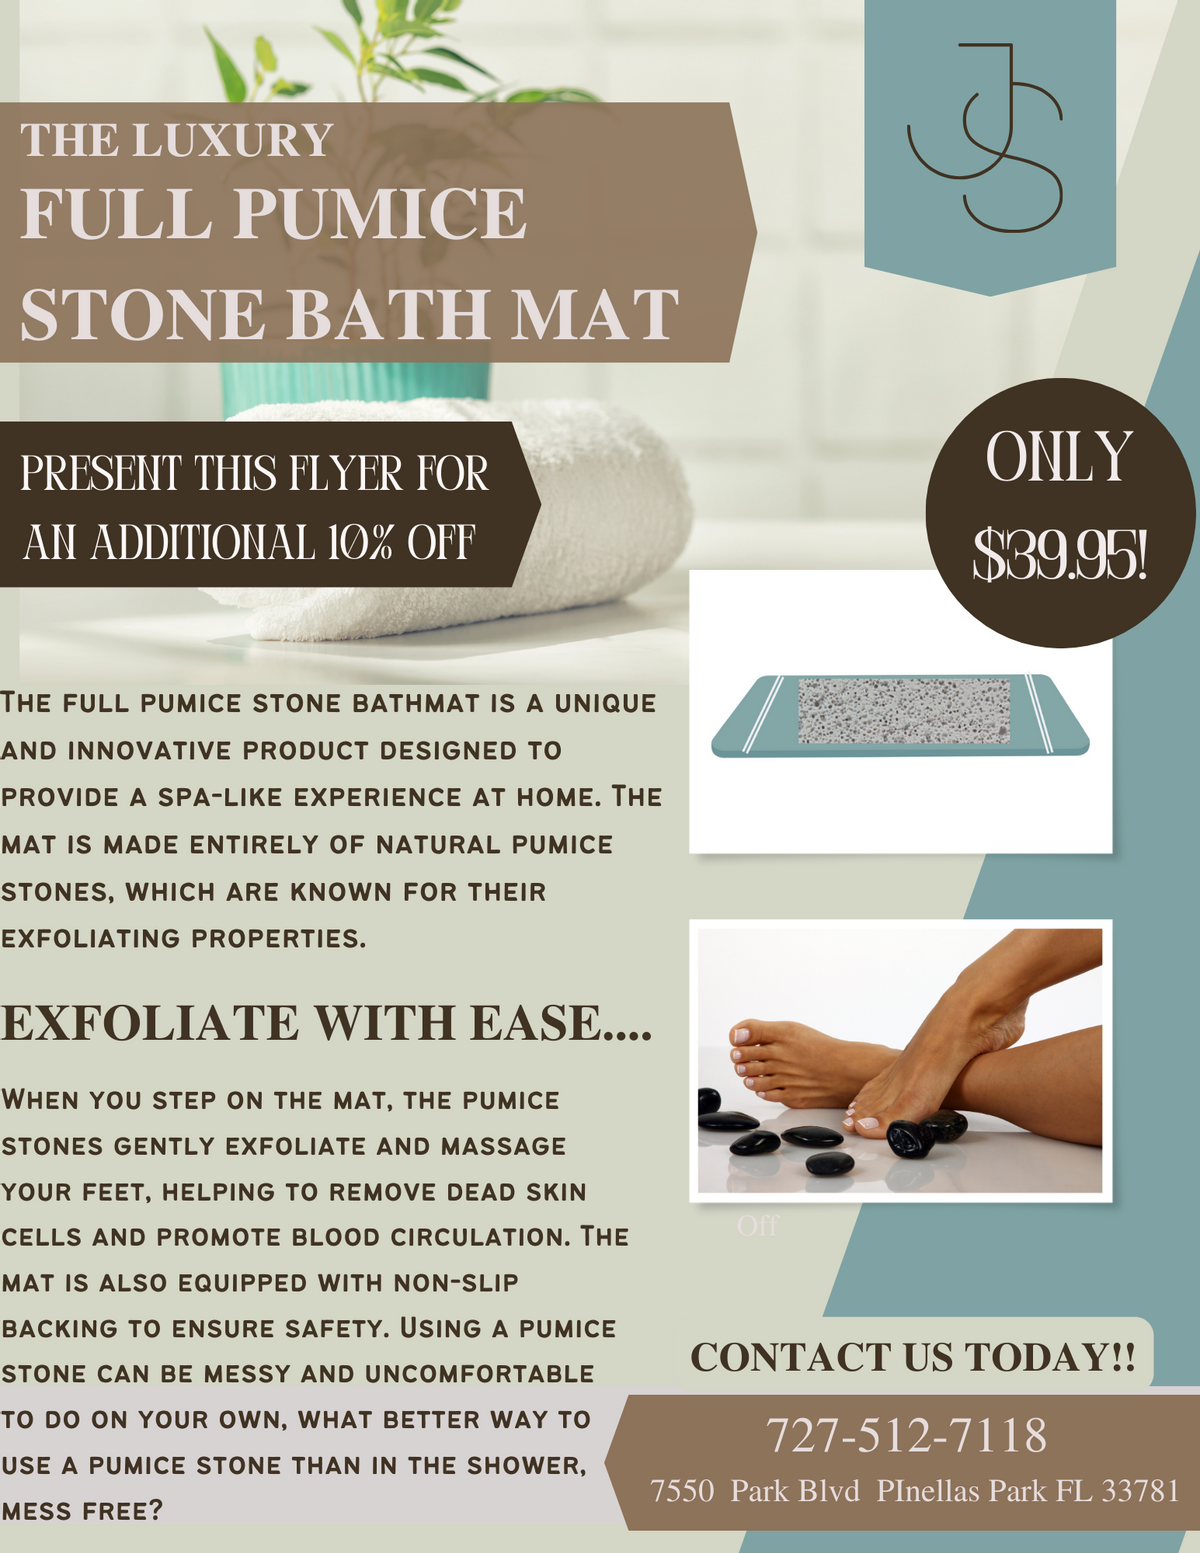 THE LUXURY
FULL PUMICE
STONE BATH MAT
PRESENT THIS FLYER FOR
AN ADDITIONAL 10% OFF
THE FULL PUMICE STONE BATHMAT IS A UNIQUE
AND INNOVATIVE PRODUCT DESIGNED TO
PROVIDE A SPA-LIKE EXPERIENCE AT HOME. THE
MAT IS MADE ENTIRELY OF NATURAL PUMICE
STONES, WHICH ARE KNOWN FOR THEIR
EXFOLIATING PROPERTIES.
EXFOLIATE WITH EASE....
WHEN YOU STEP ON THE MAT, THE PUMICE
STONES GENTLY EXFOLIATE AND MASSAGE
YOUR FEET, HELPING TO REMOVE DEAD SKIN
CELLS AND PROMOTE BLOOD CIRCULATION. THE
MAT IS ALSO EQUIPPED WITH NON-SLIP
BACKING TO ENSURE SAFETY. USING A PUMICE
STONE CAN BE MESSY AND UNCOMFORTABLE
TO DO ON YOUR OWN, WHAT BETTER WAY TO
USE A PUMICE STONE THAN IN THE SHOWER,
MESS FREE?
Off
ایی
ONLY
$39.95!
CONTACT US TODAY!!
727-512-7118
7550 Park Blvd PInellas Park FL 33781